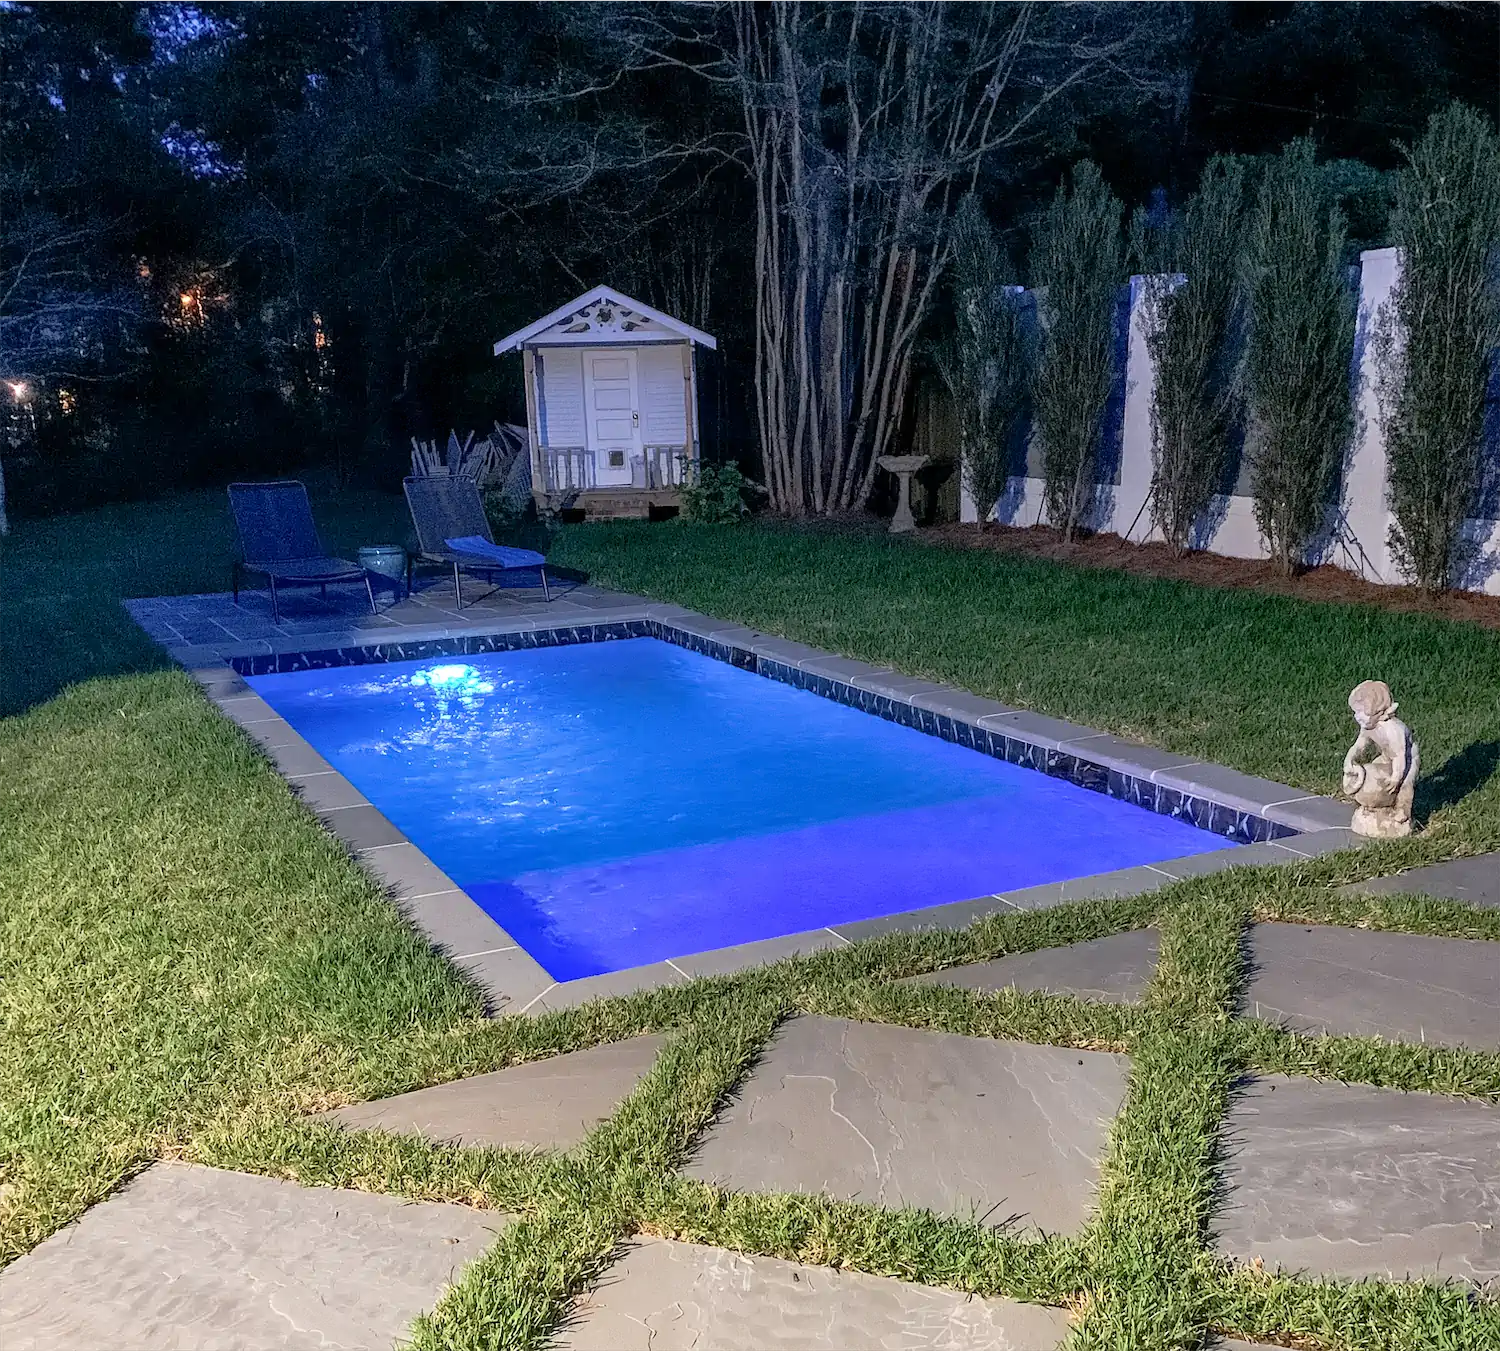 beautiful LED pool lighting upgrade and pool renovation project from Ogden Pools in Memphis, TN